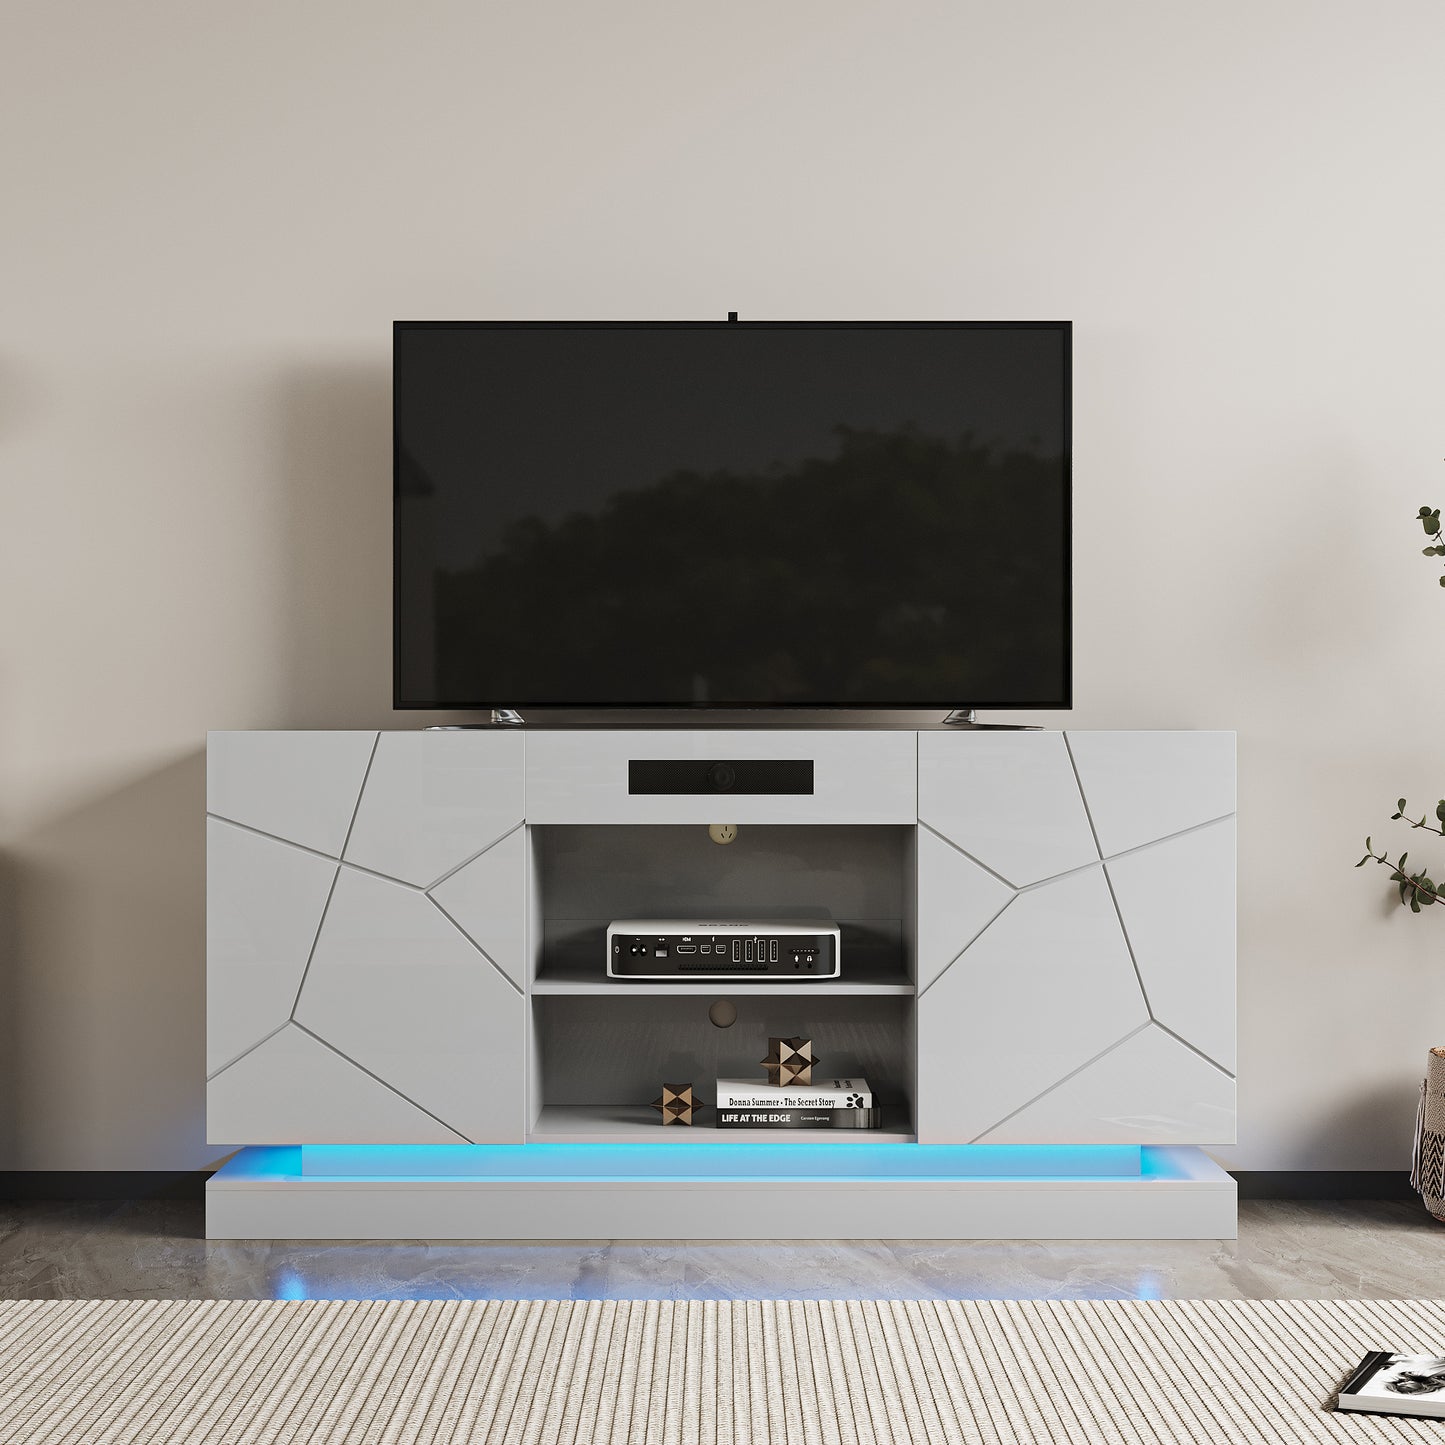 TV Cabinet , TV Stand with bluetooth speaker , Modern LED TV Cabinet with Storage Drawers, Living Room Entertainment Center Media Console Table - Enova Luxe Home Store